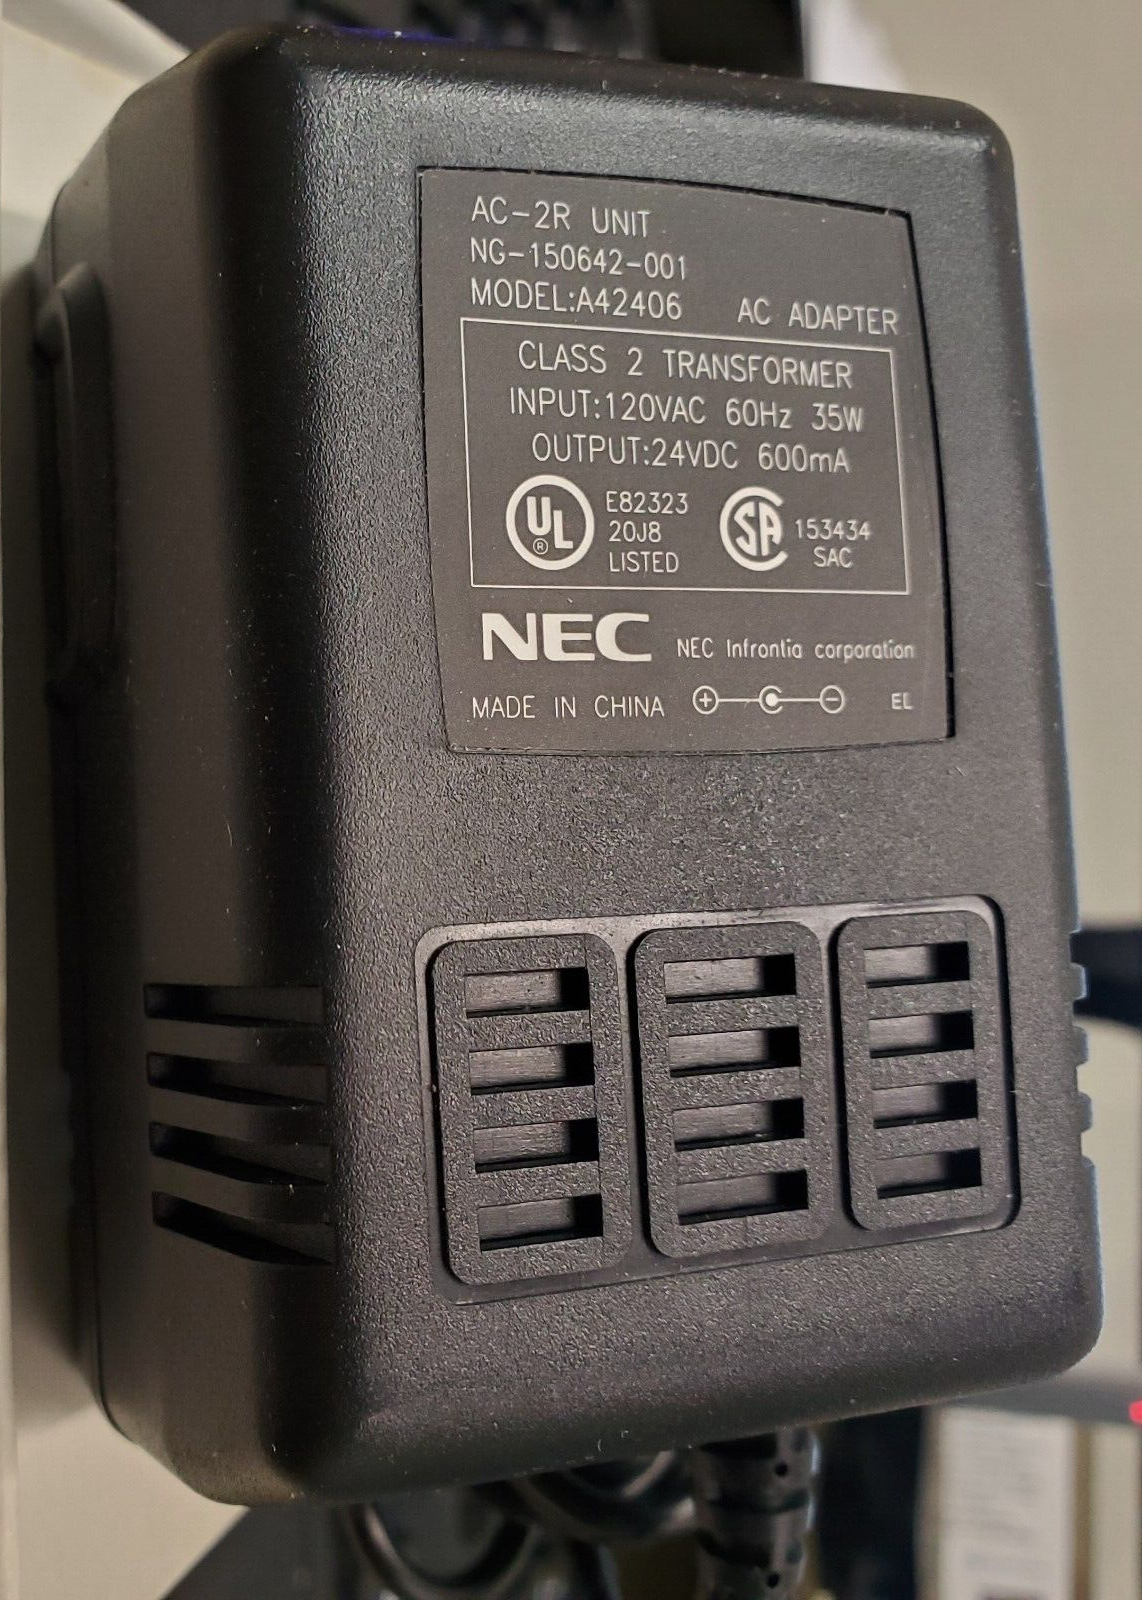 *Brand NEW*Genuine Original NEC 24VDC 600mA AC Adapter AC-2R Cord Cable Charger Power Supply